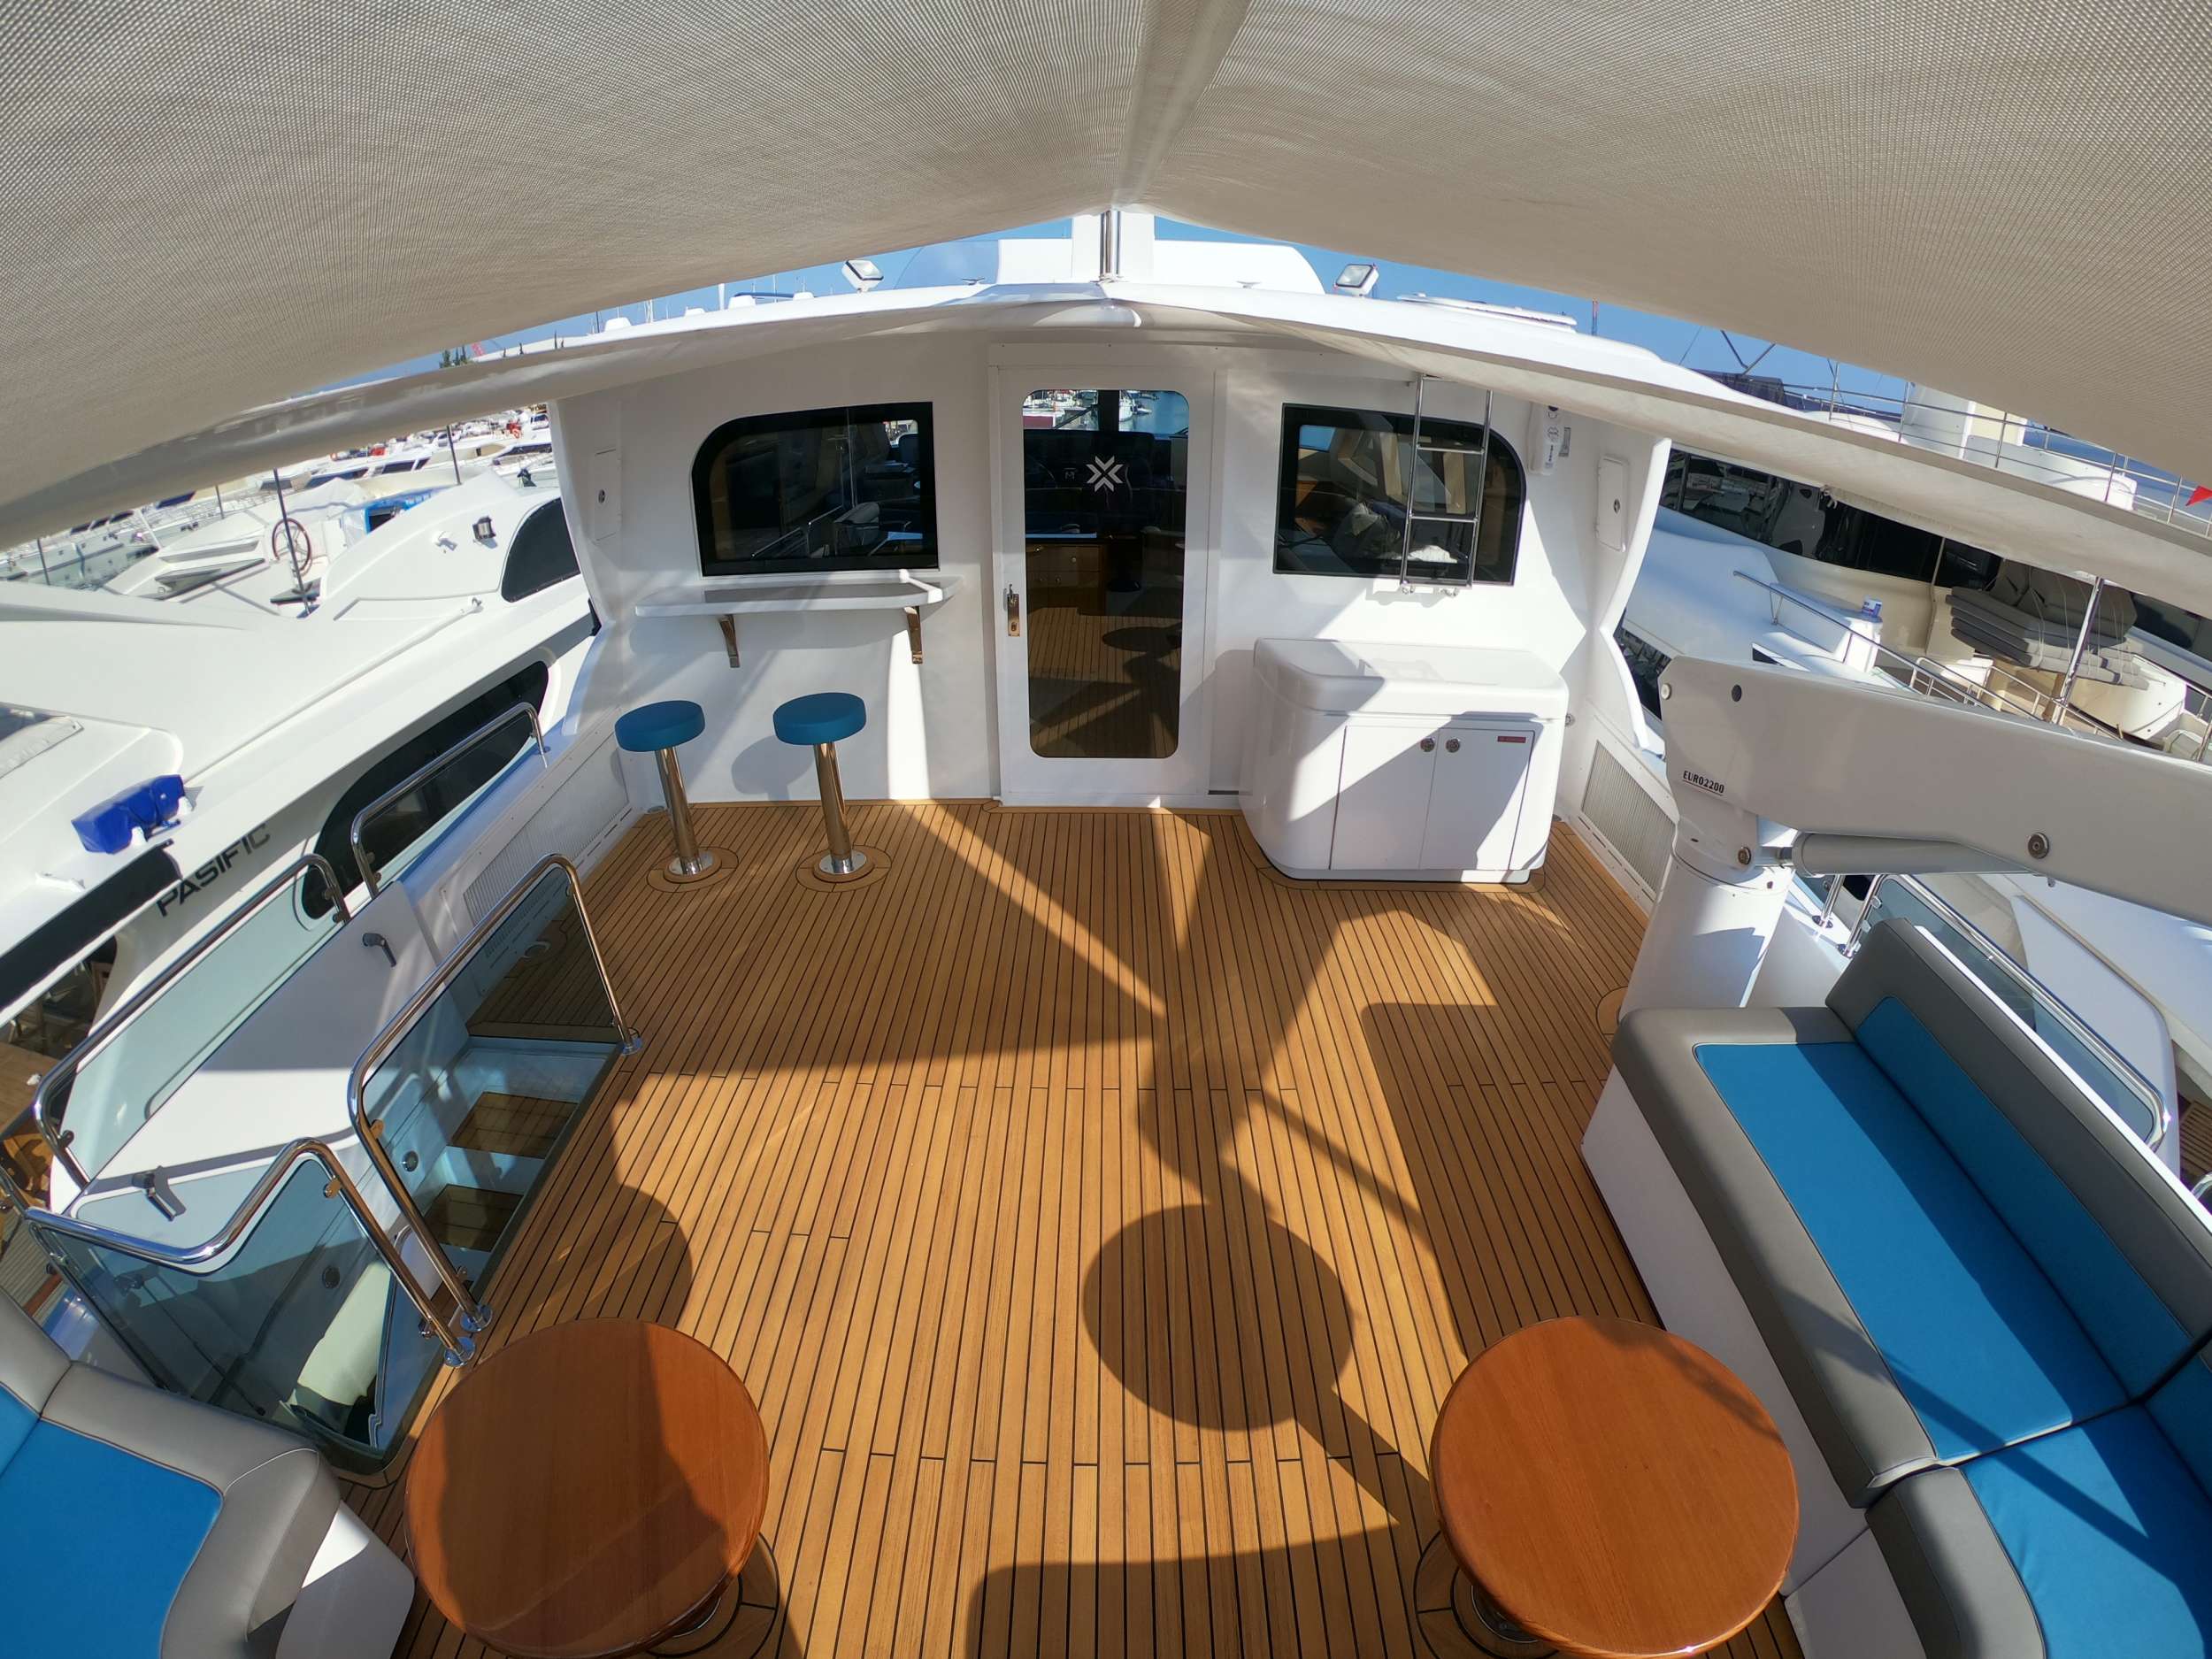 Flybridge aft with awnings